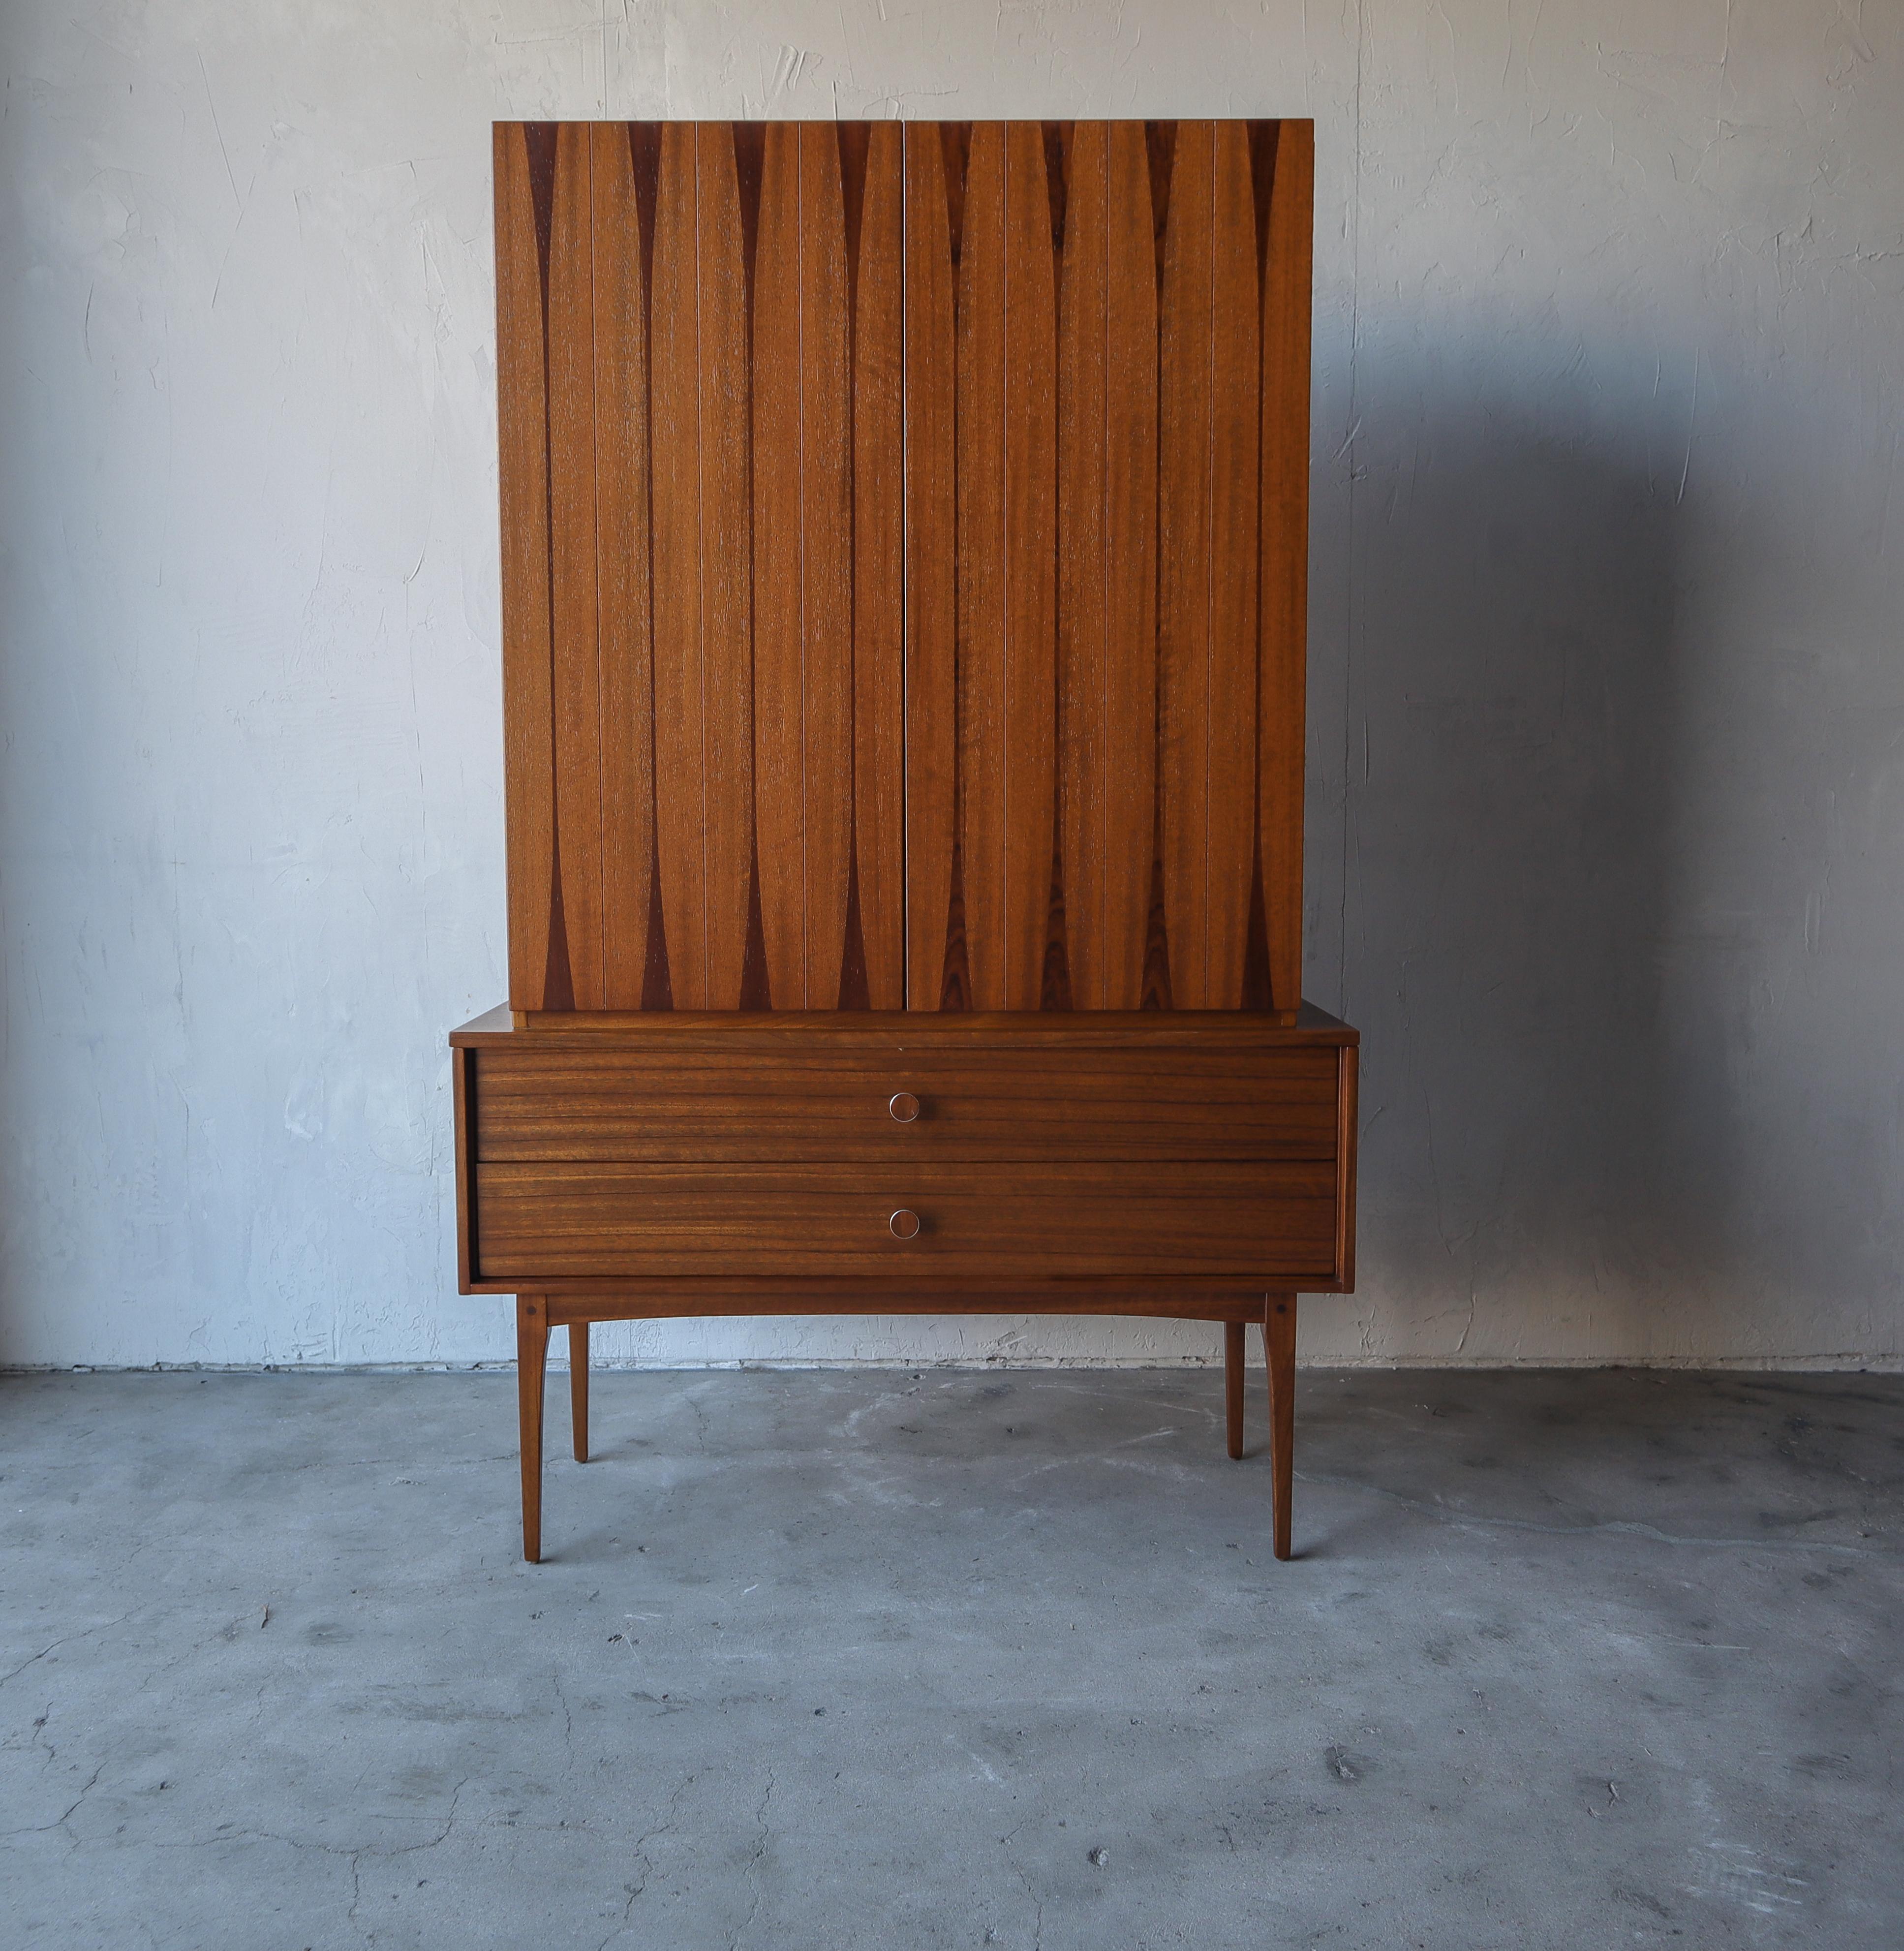 Super rare and early midcentury, armoire by Lane. This piece is absolutely beautiful. It's a stunning combination of walnut and rosewood with brass pulls that too are inlaid with rosewood. A gorgeous and feminine piece supported by 4 tall tapered